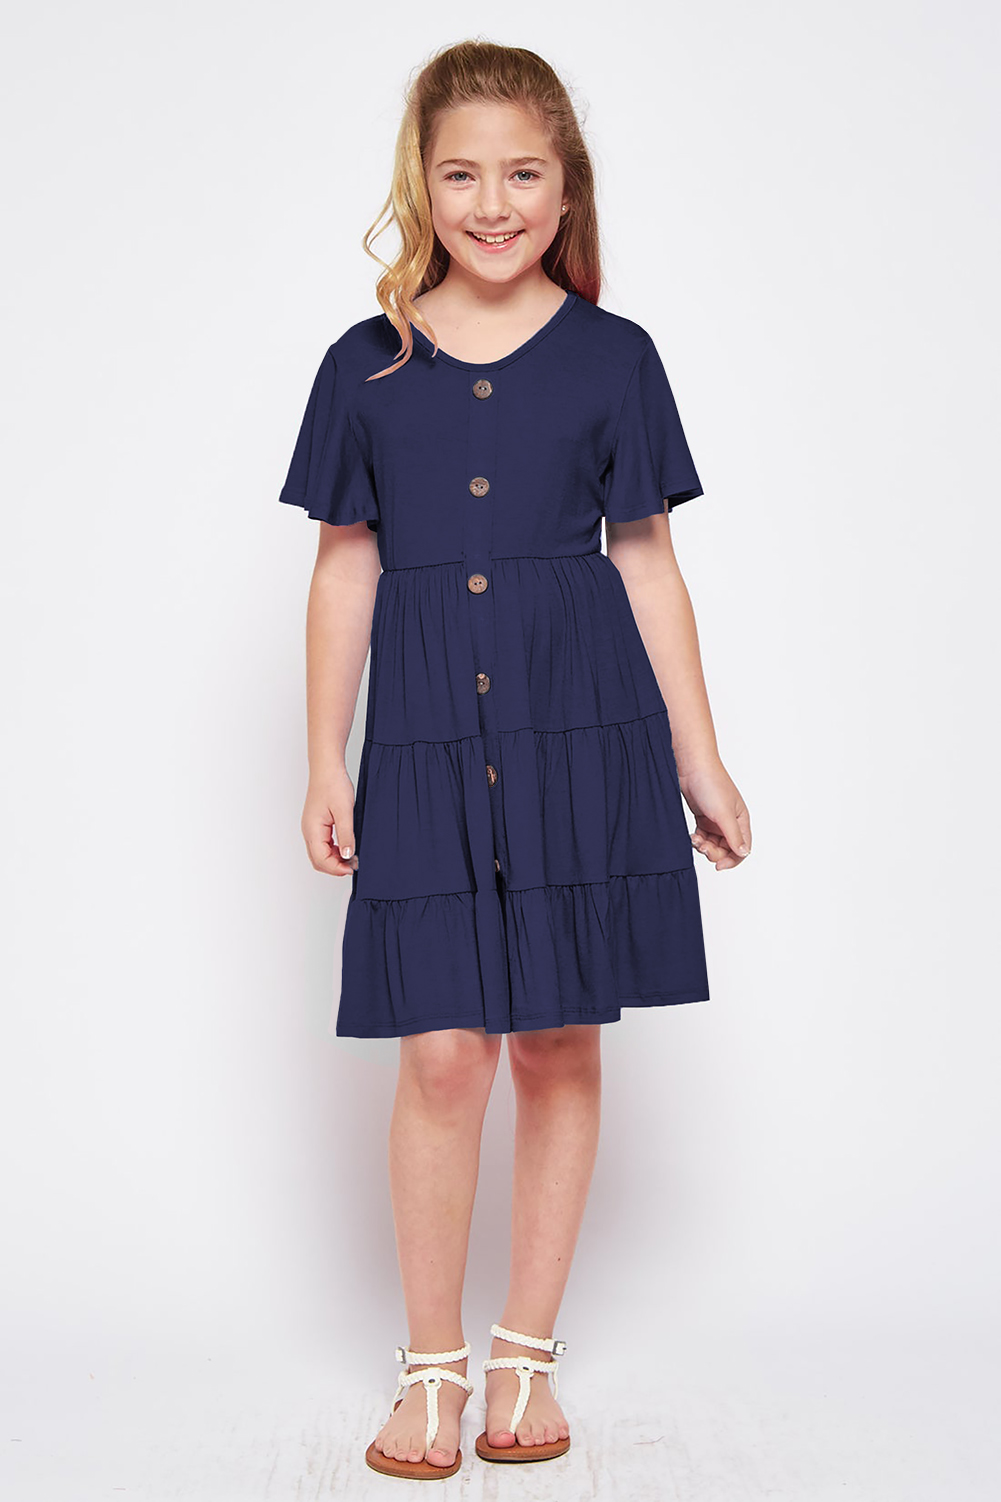 Blue Flutter Sleeves Tiered Girls’ Dress With Buttons